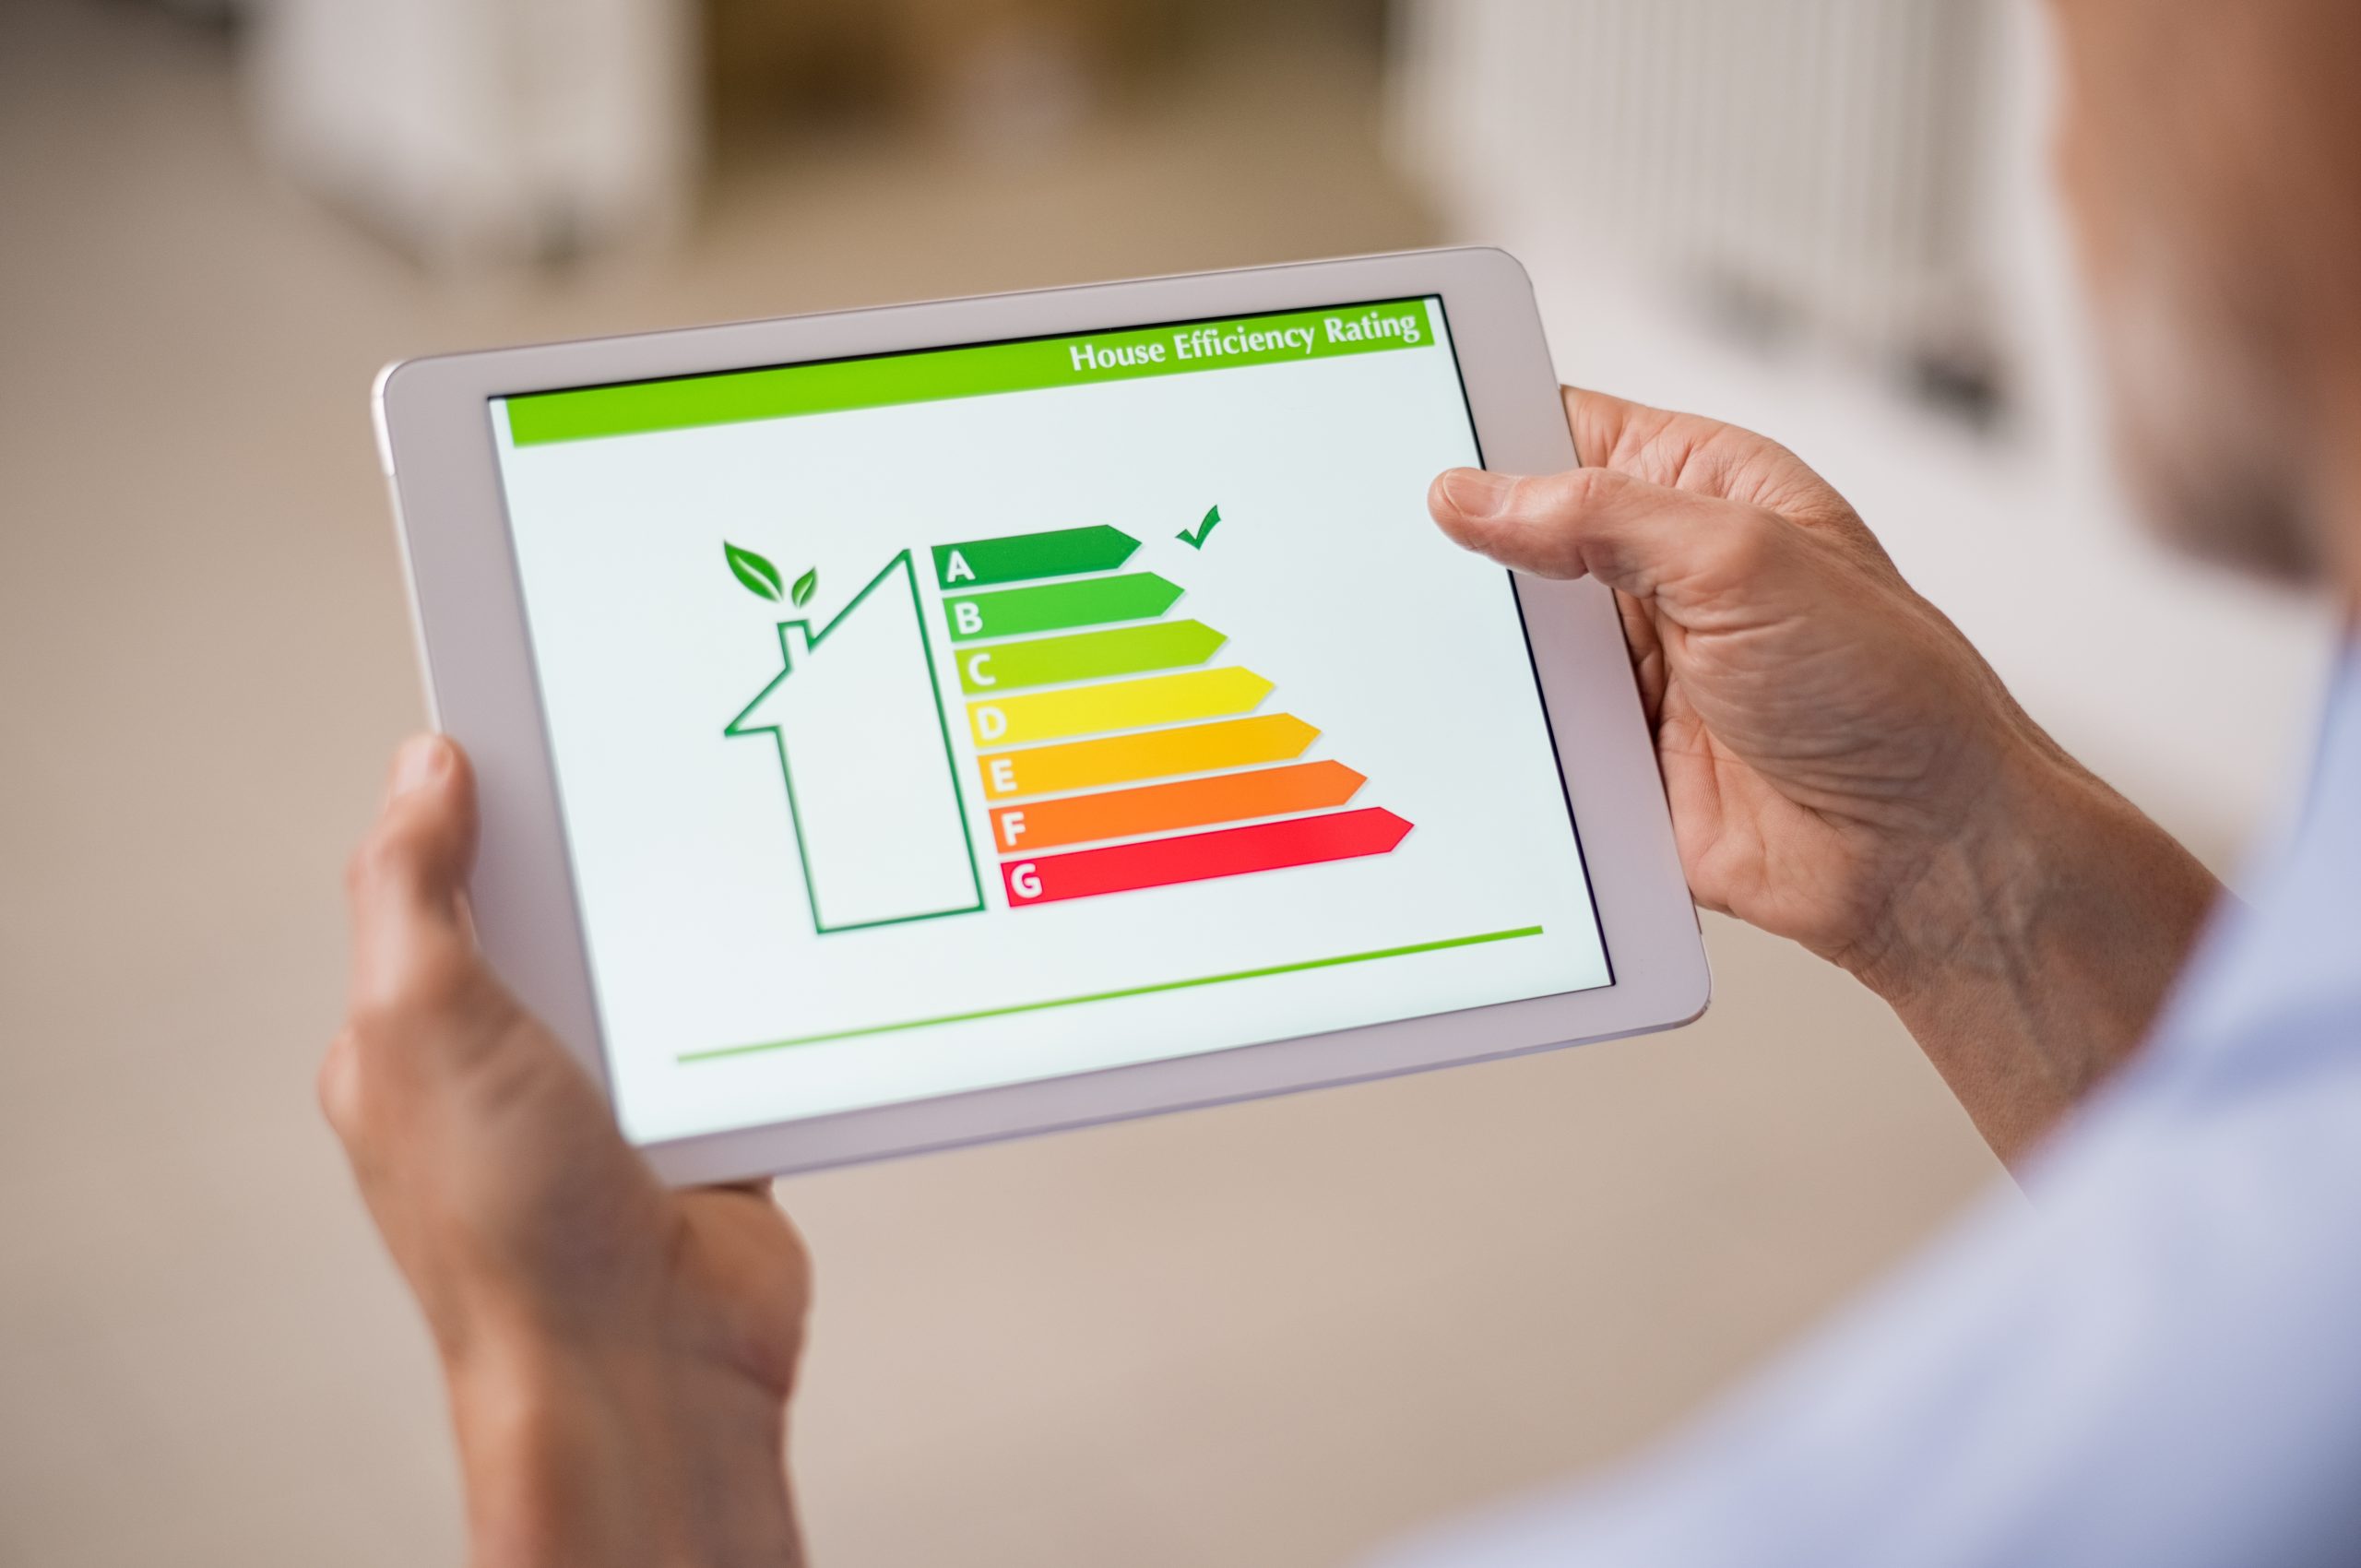 5 Ideas to Make Your Home More Energy-Efficient